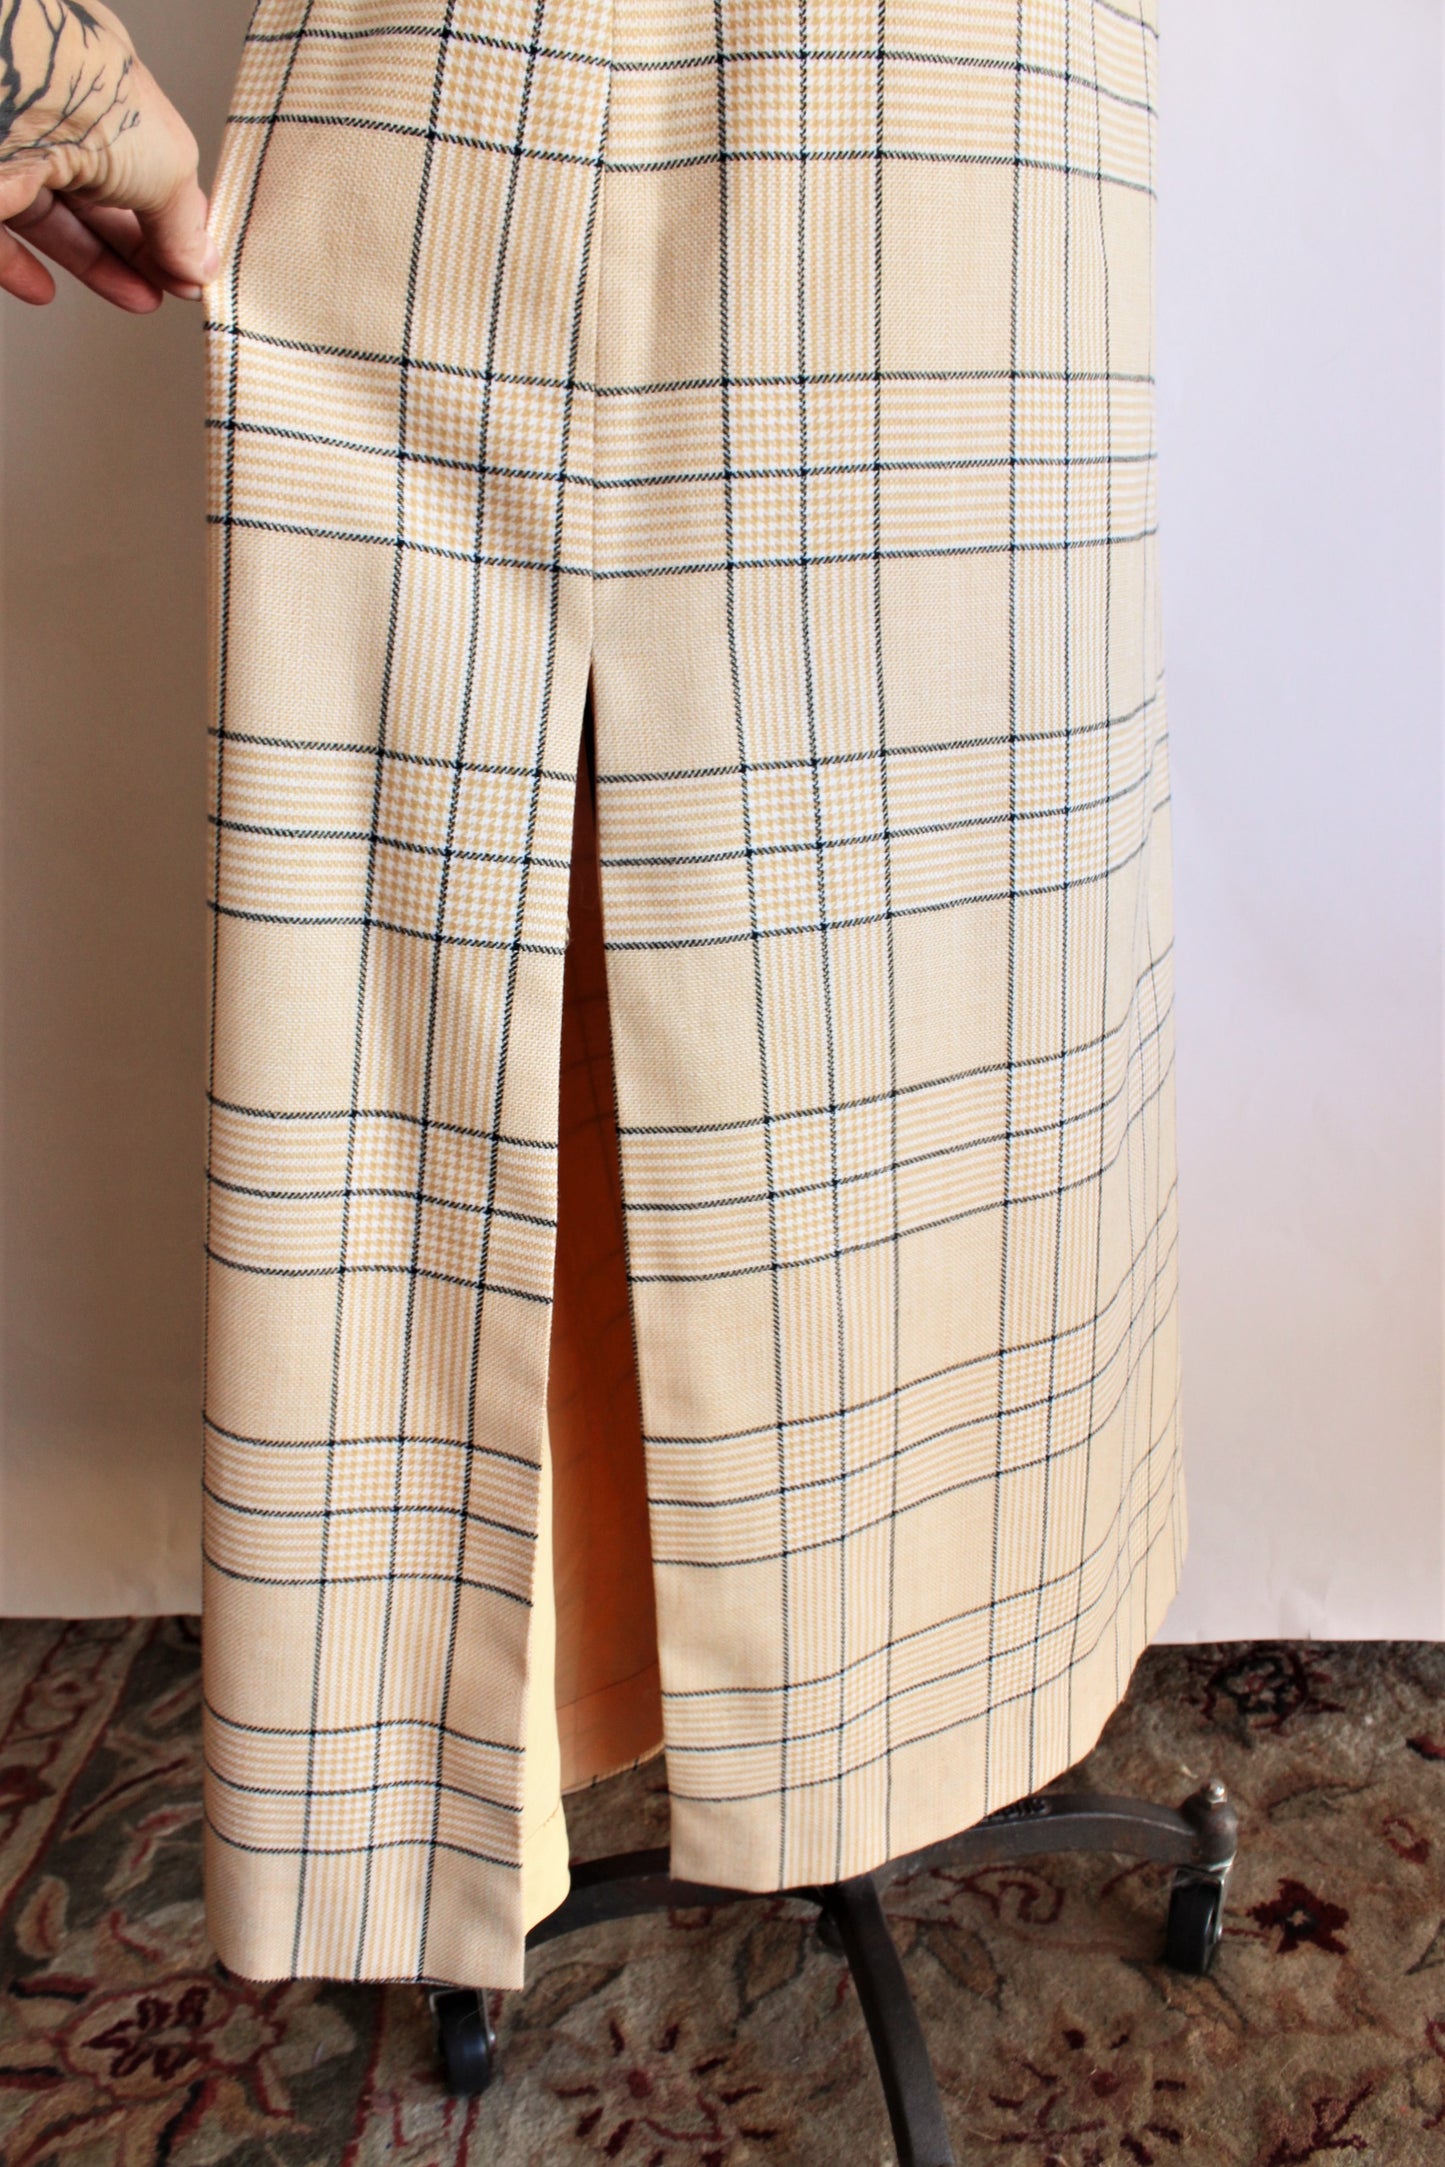 Vintage Maxiskirt in a Burberry-like plaid.